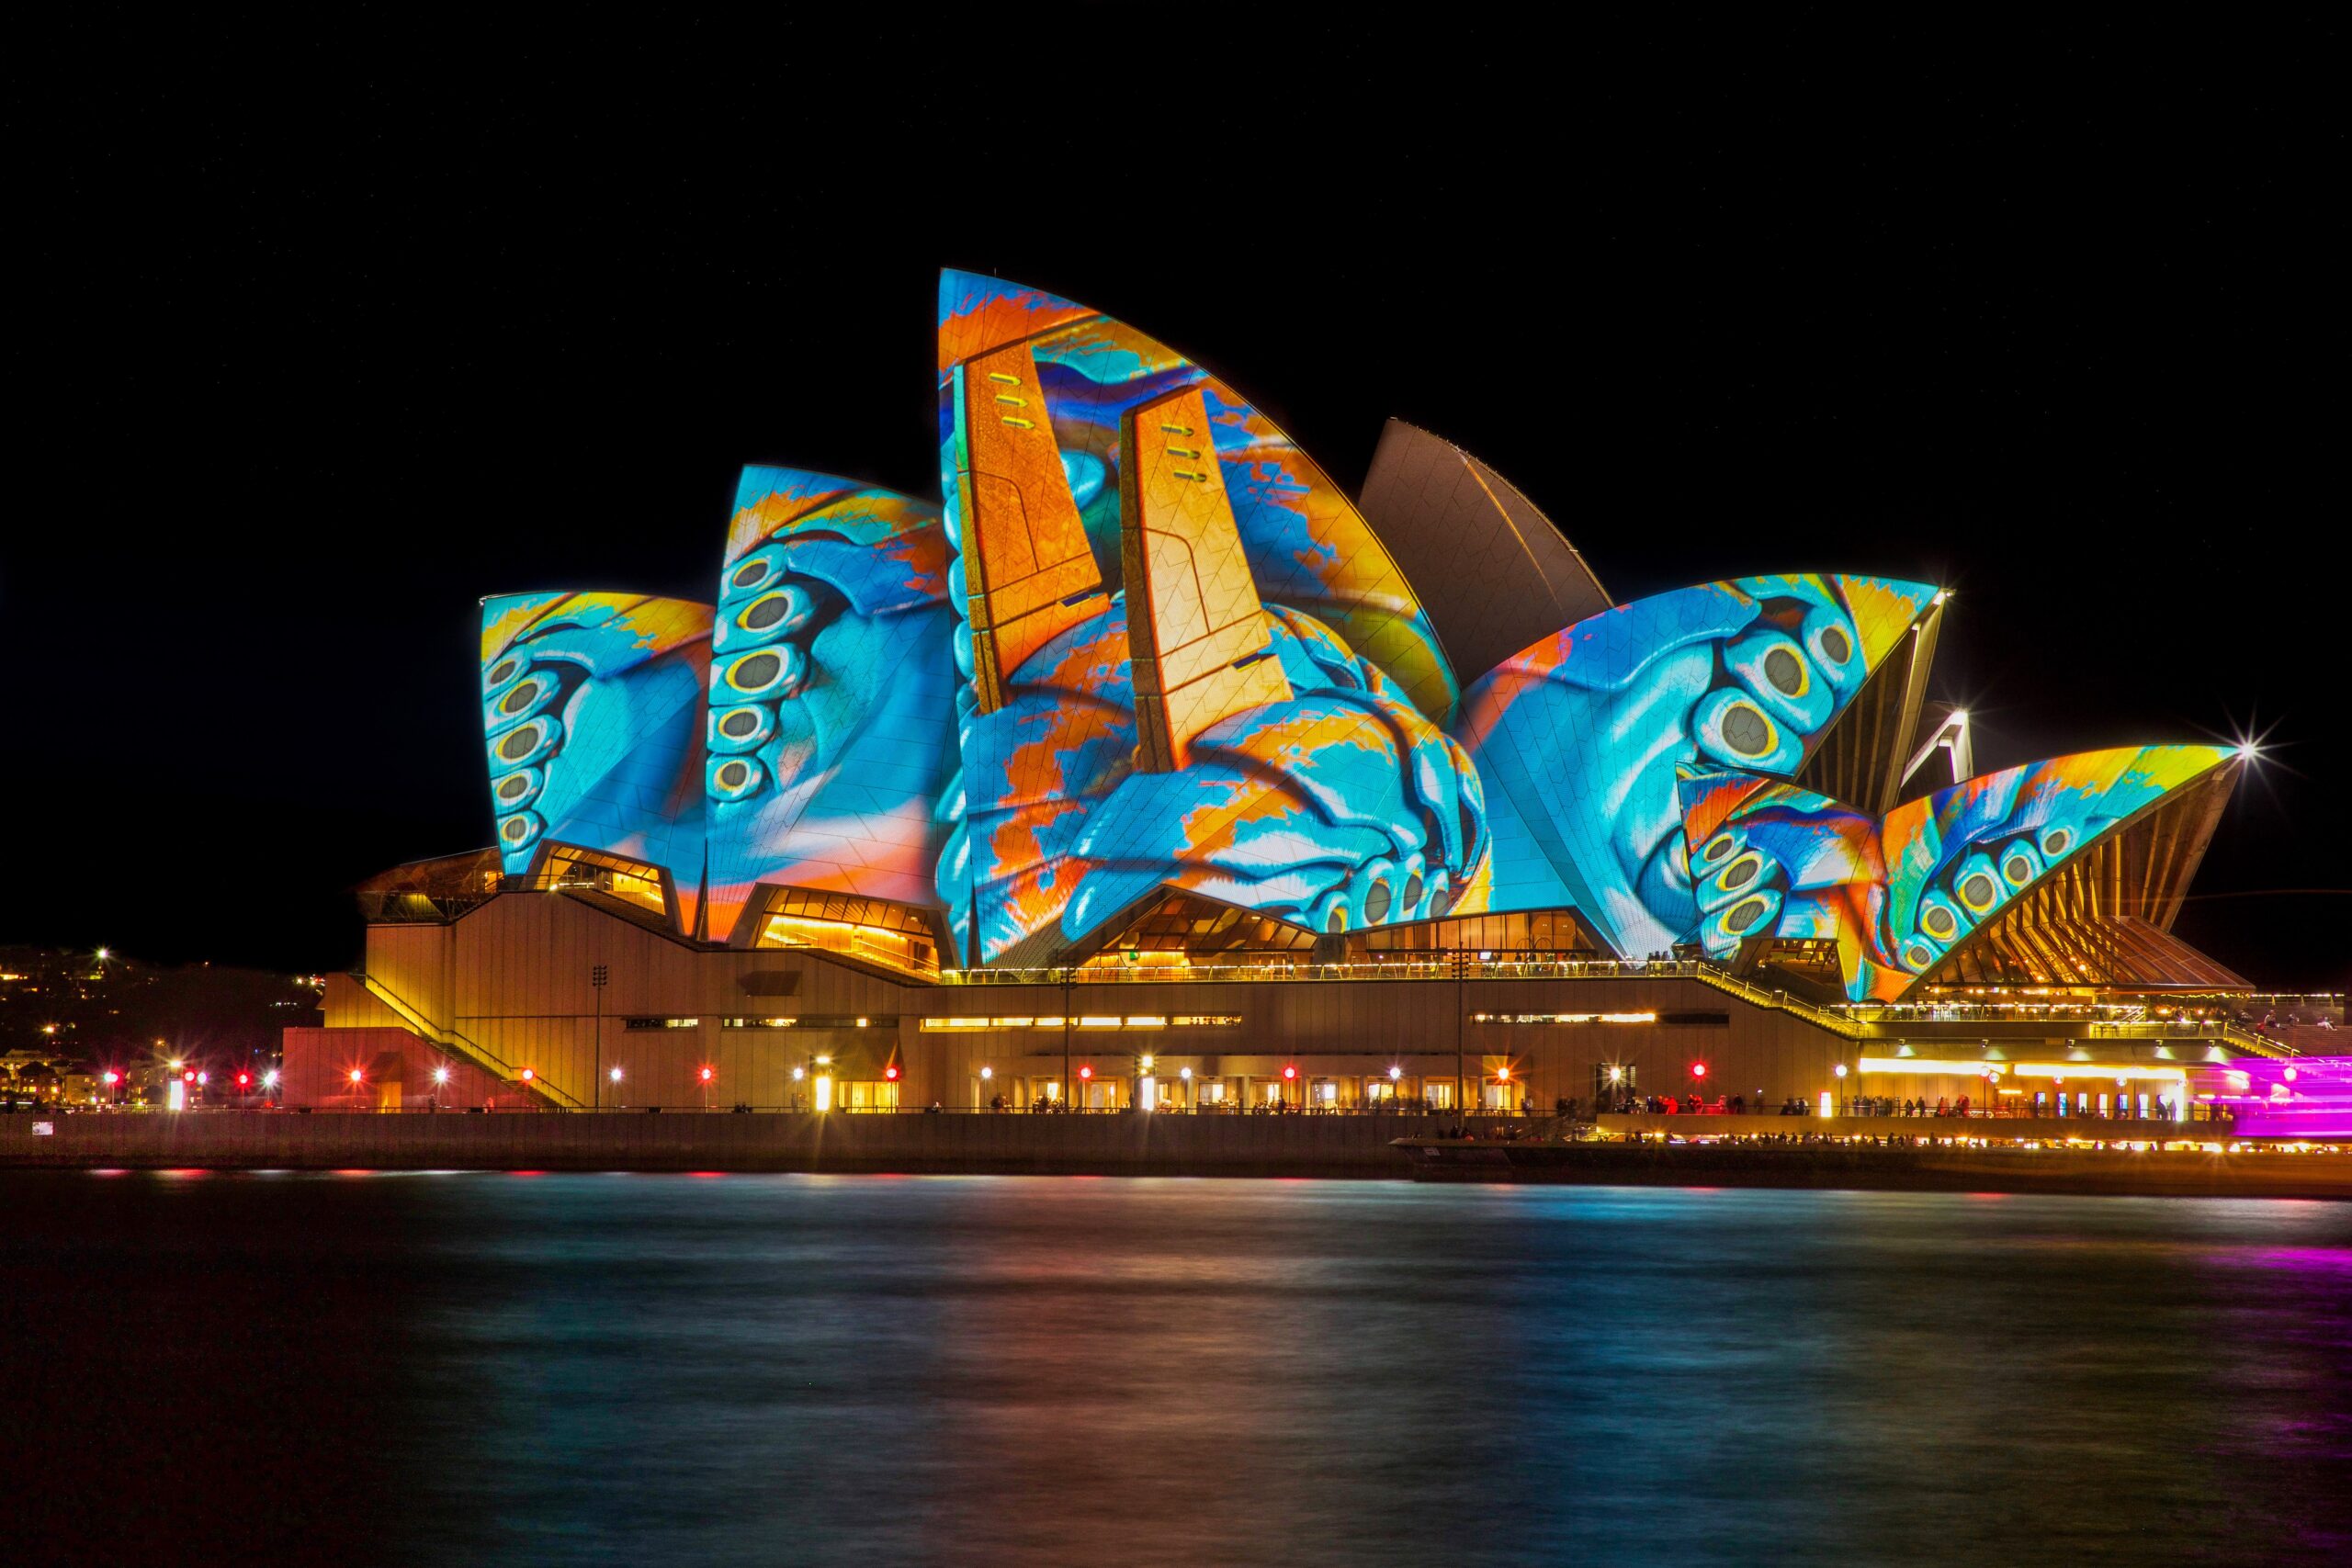 Vivid to receive funding injection from City of Sydney